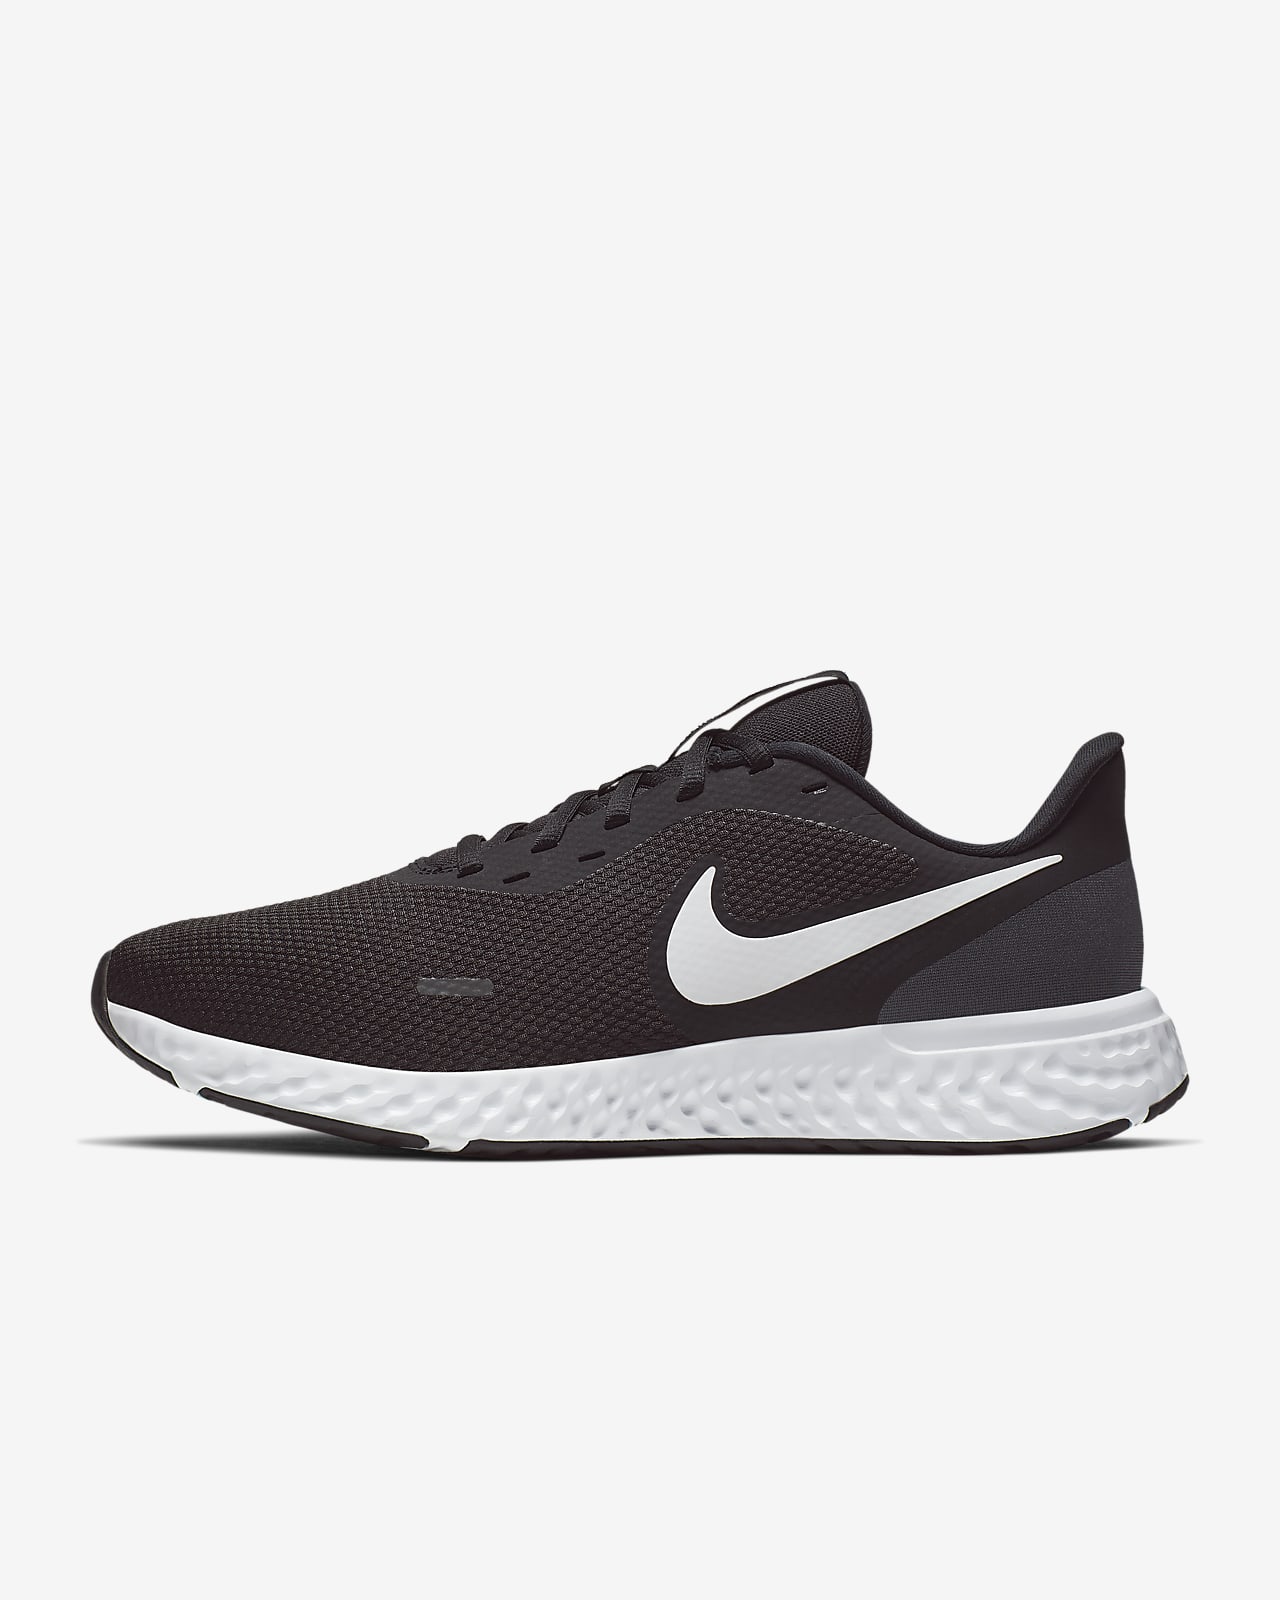 nike wide running shoes mens